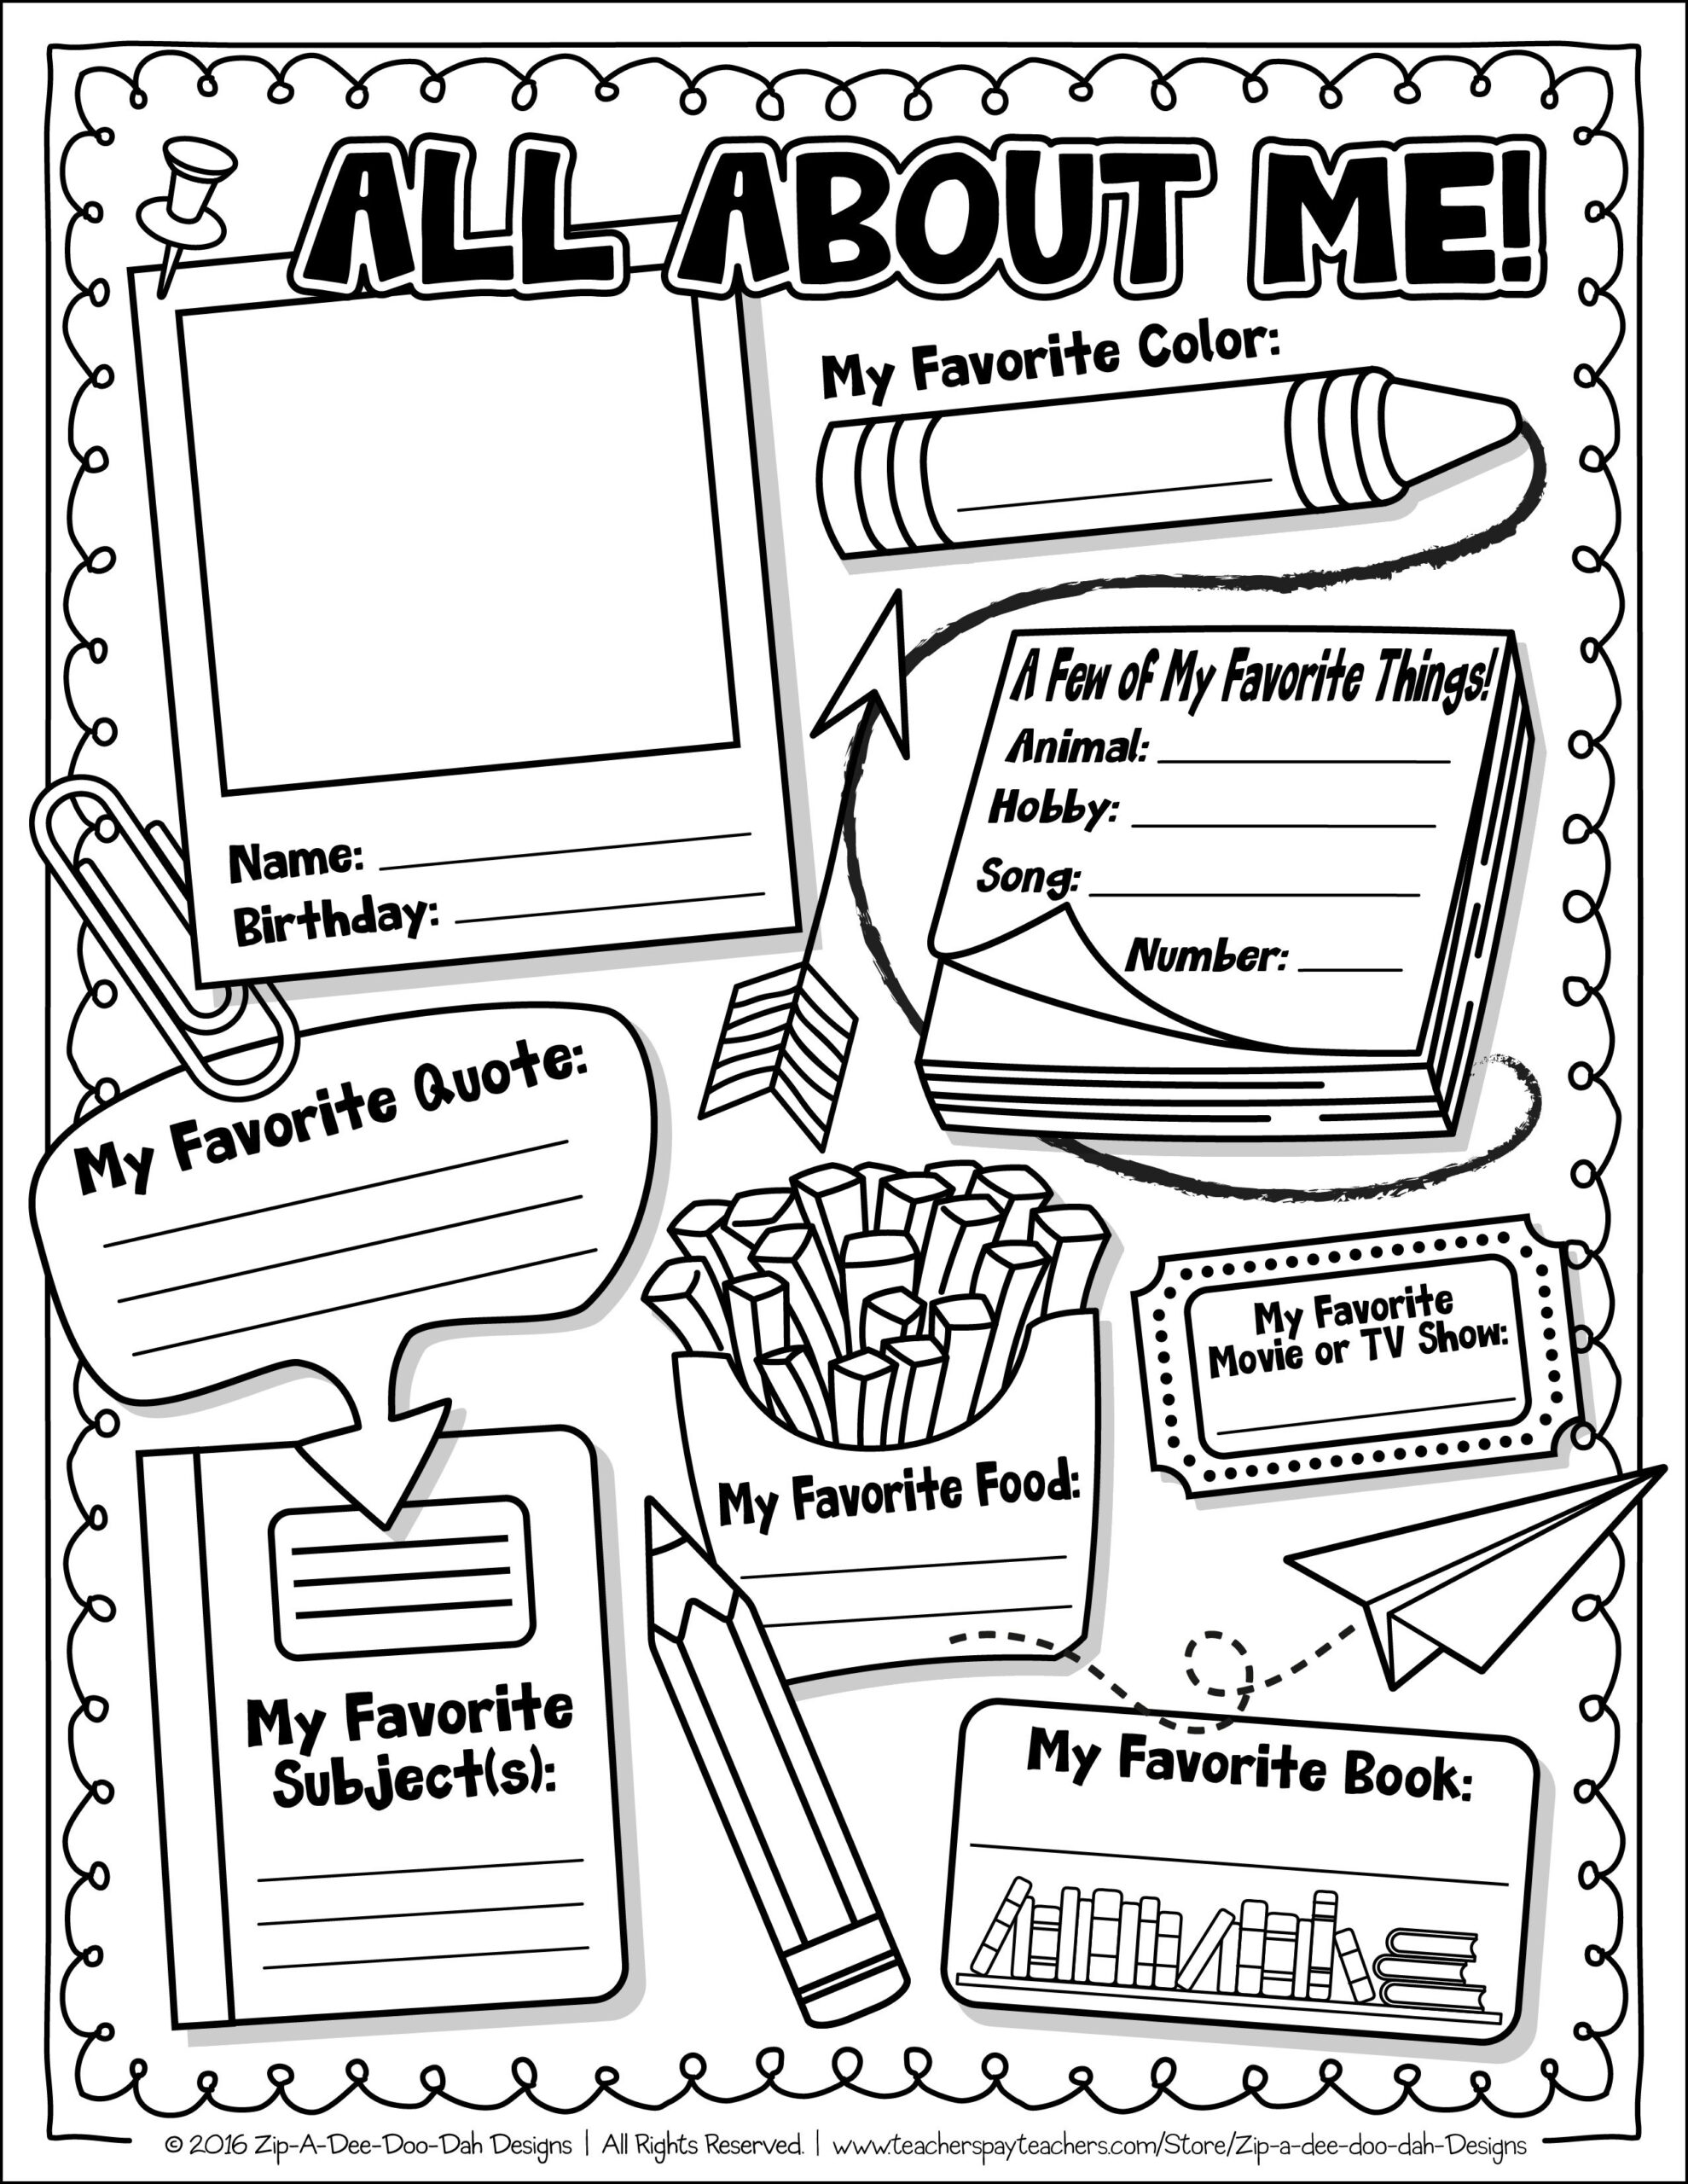  FREE All About Me Activity Worksheet About Me Activities First Day 